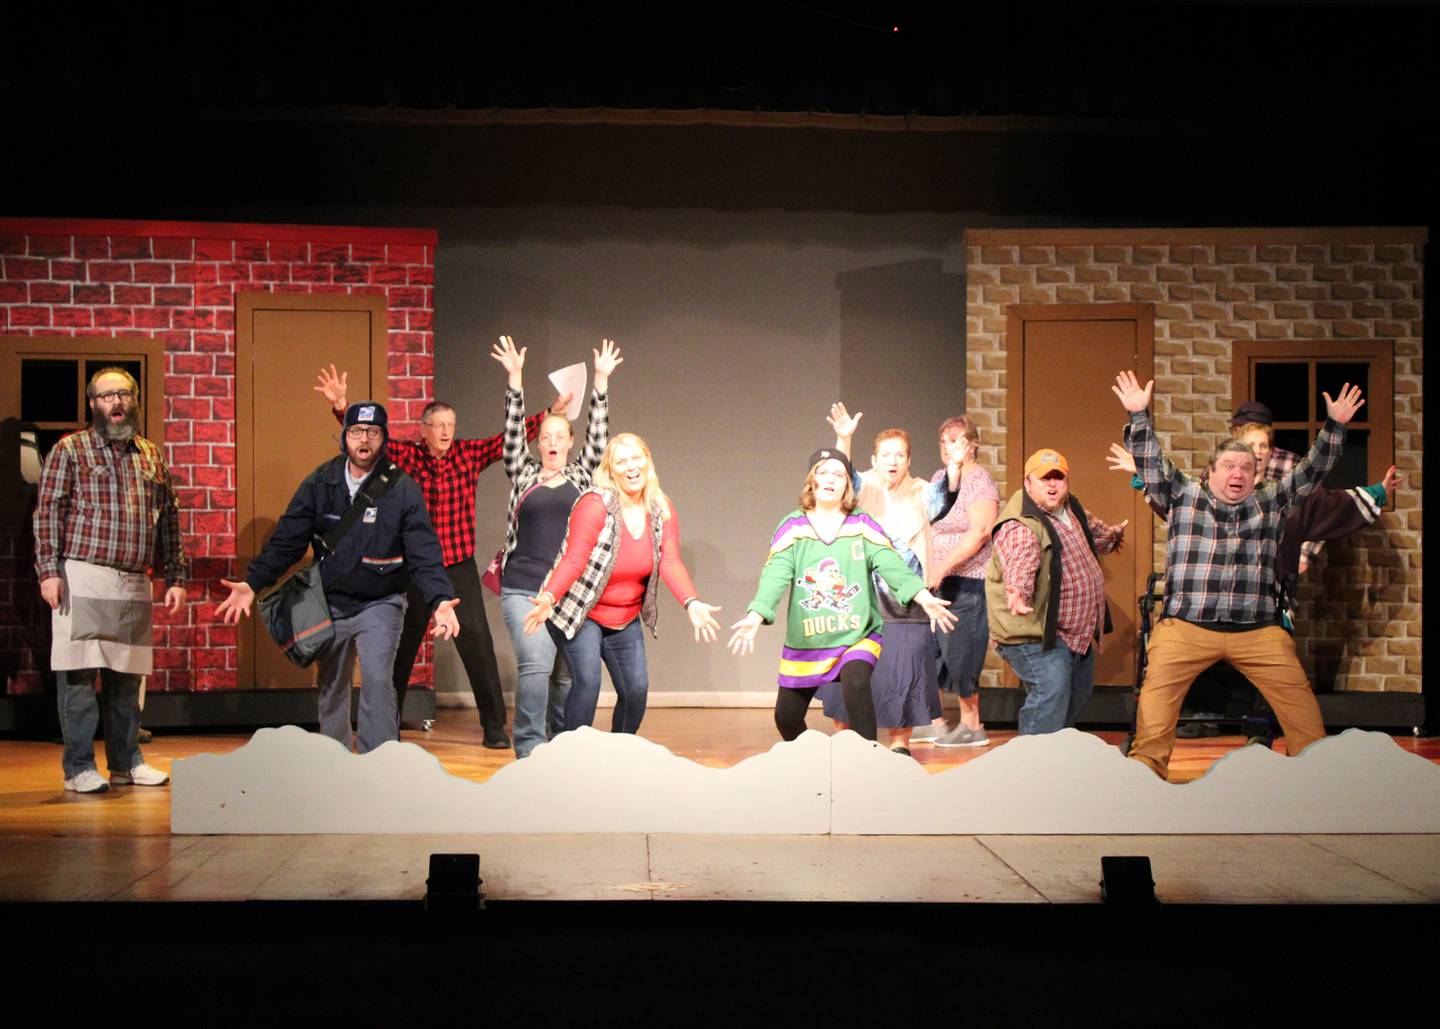 The cast of "Grumpy Old Men - the Musical" tell all about their home of Wabasha during Engle Lane Theatre's season opening show.